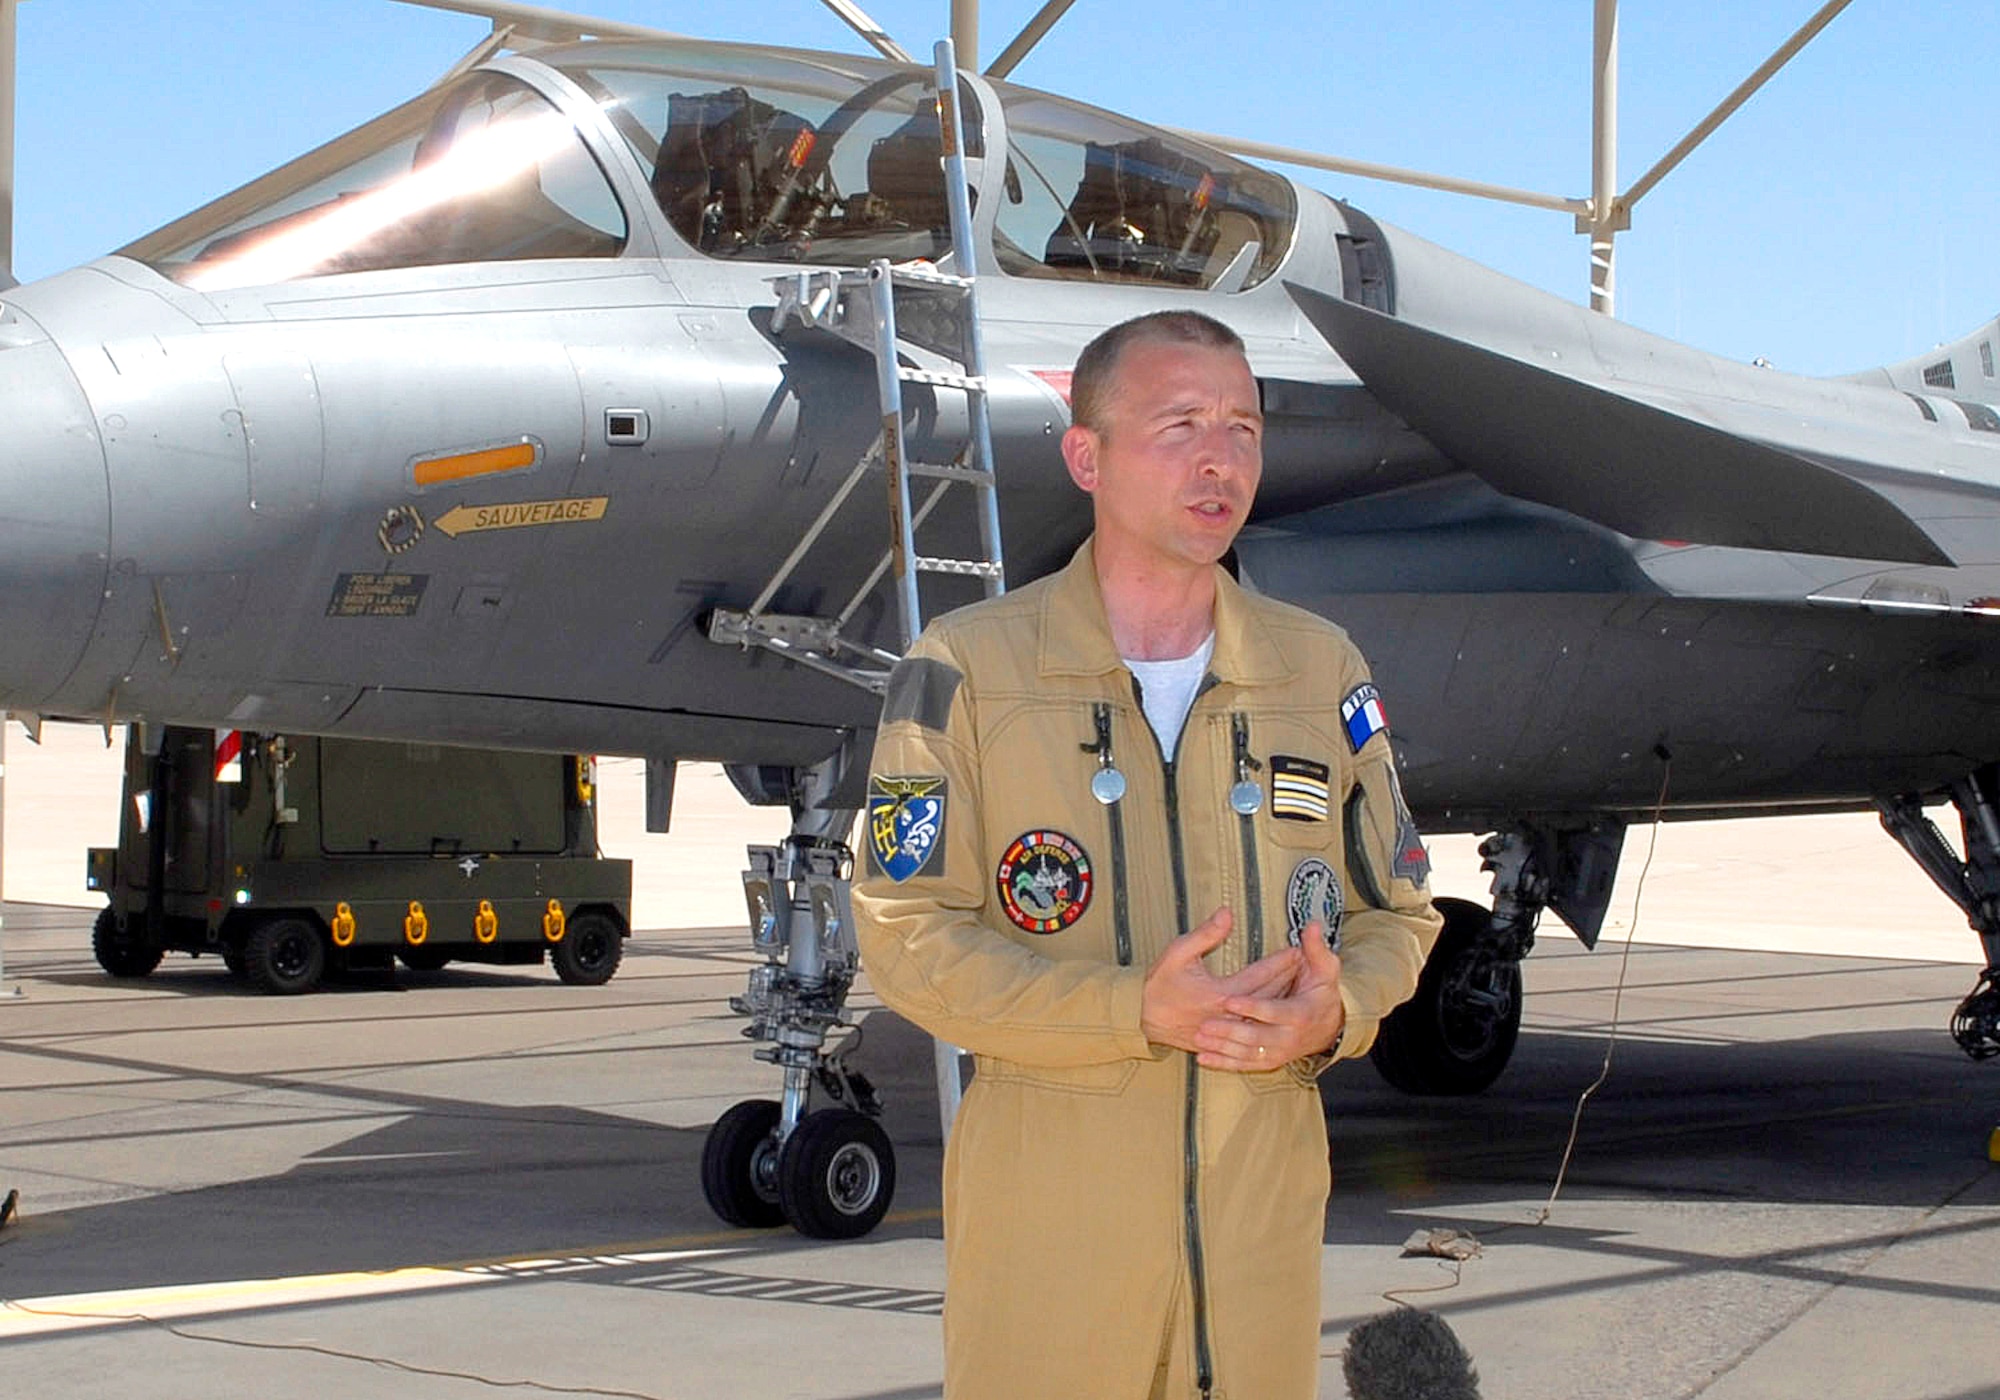 Lt. Col. Fabrice Granclaudon, French air force squadron commander, stands in front of a French Rafale aircraft while being interviewed by TF1 (French media) at Luke AFB, July 28. Four Rafale aircraft and more than 100 French airmen deployed for the first time on U.S. soil for an exercise July 28-Aug8 at Luke. (U.S. Air Force photo by TSgt. Nabor)